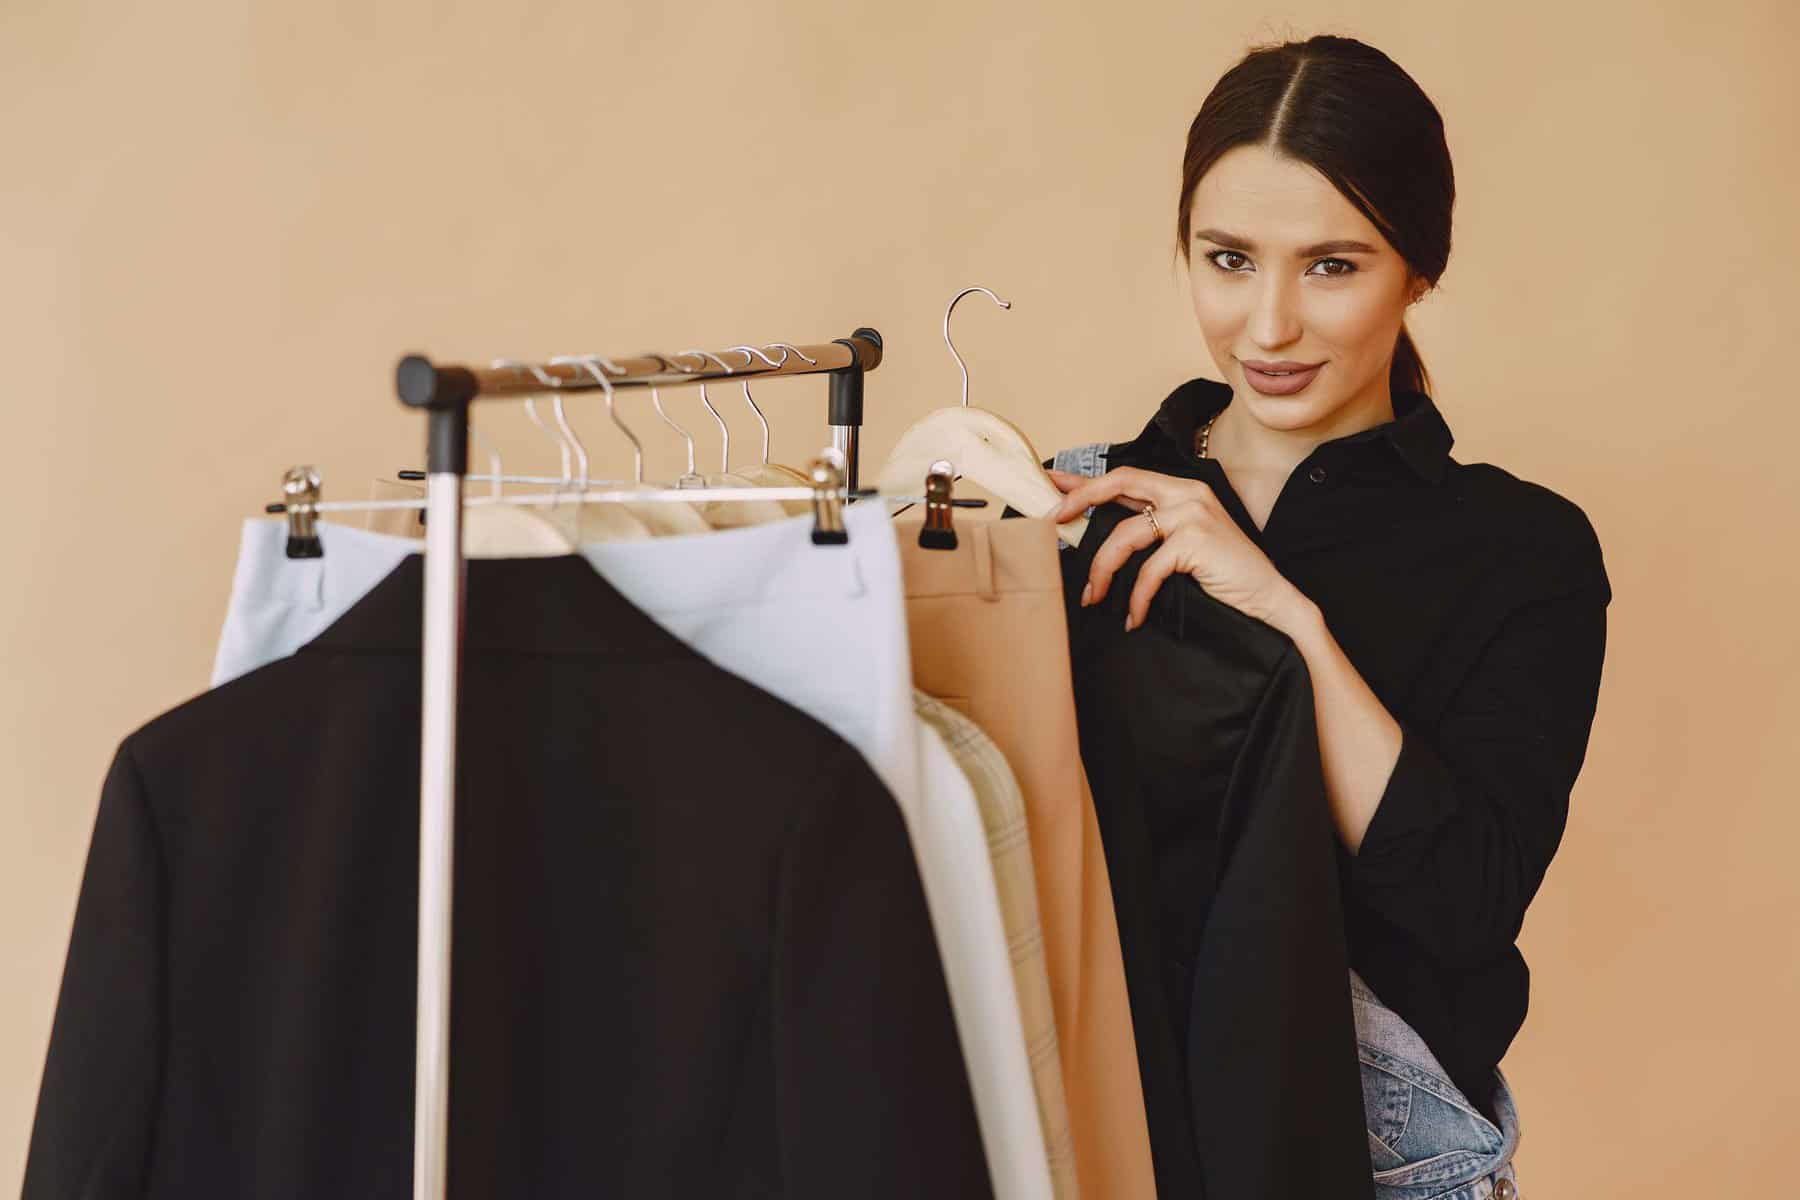 Shades of Black Every Polish Woman Should Know When Choosing Outfits